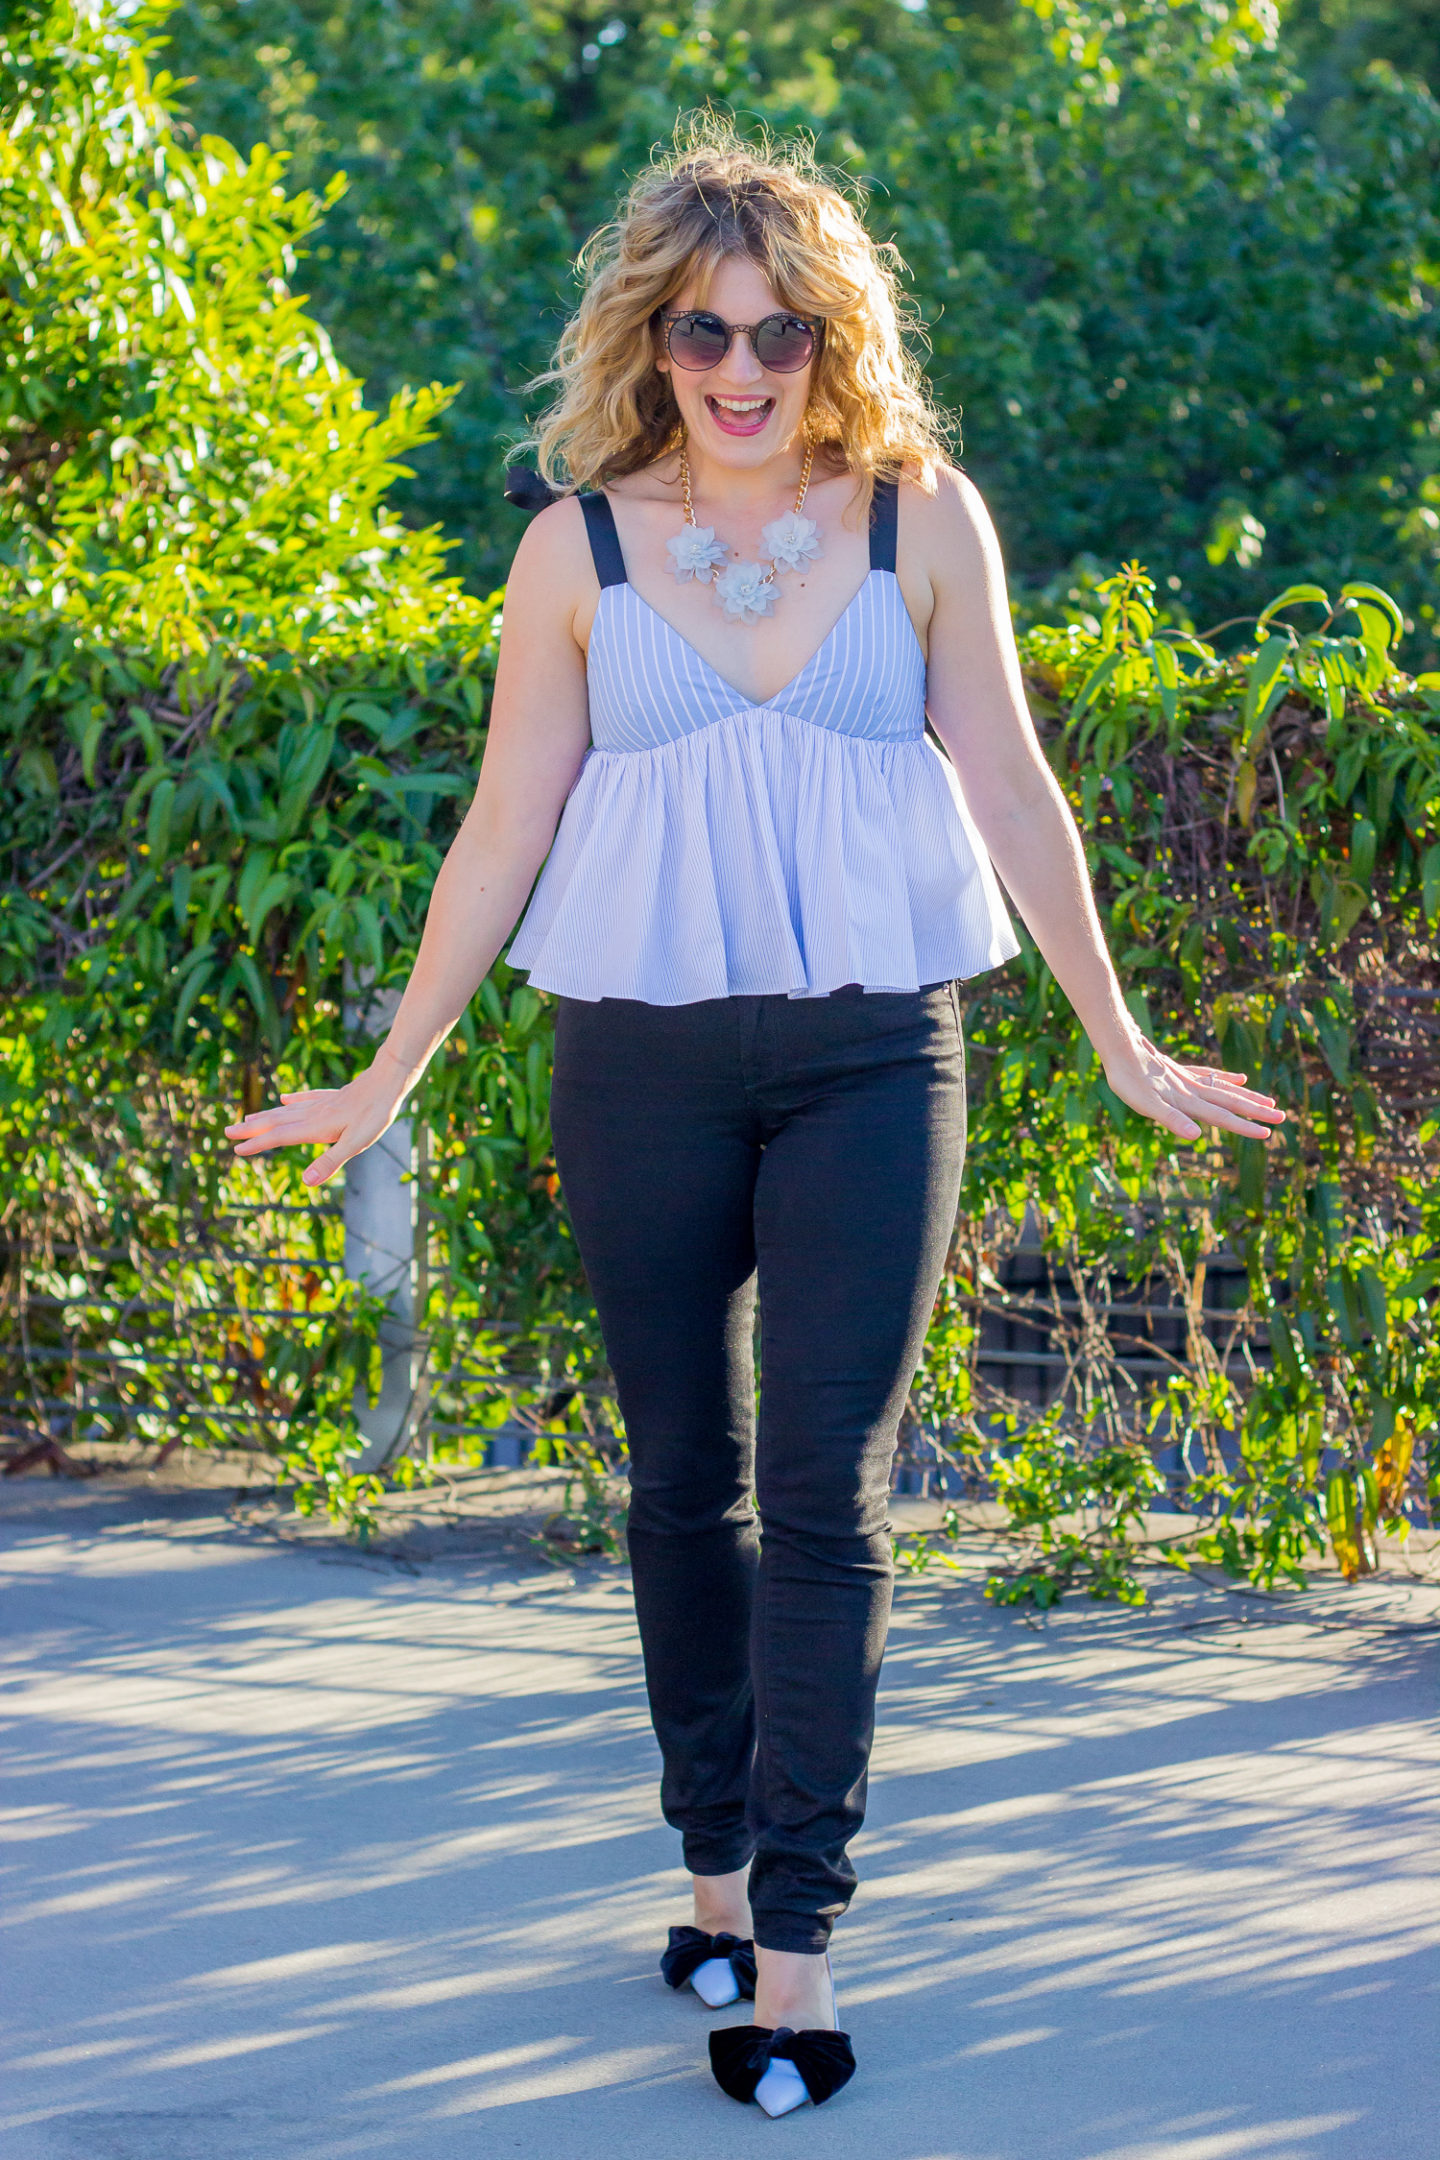 Casual summer date night ideas worn by Elise Giannasi of Belle Meets World blog